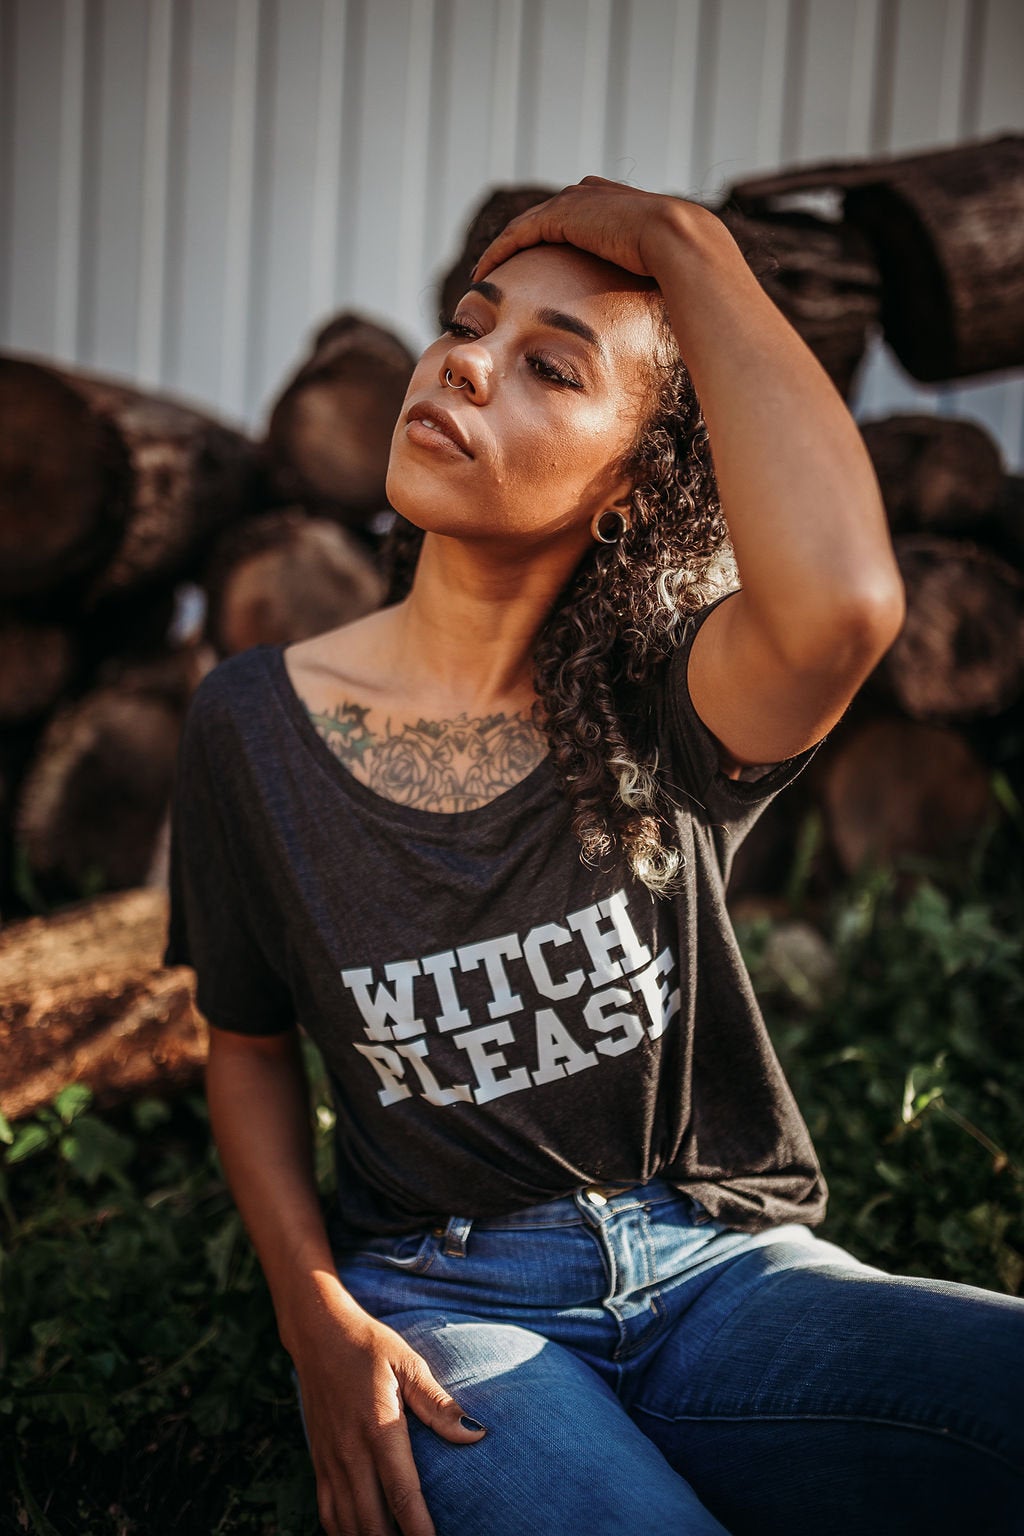 WITCH PLEASE, Gray Off Shoulder, Witch Please, Witch Please Tee, Witch Tees, Witchy Tshirts, Witch Please Shirts, Witch Tshirts